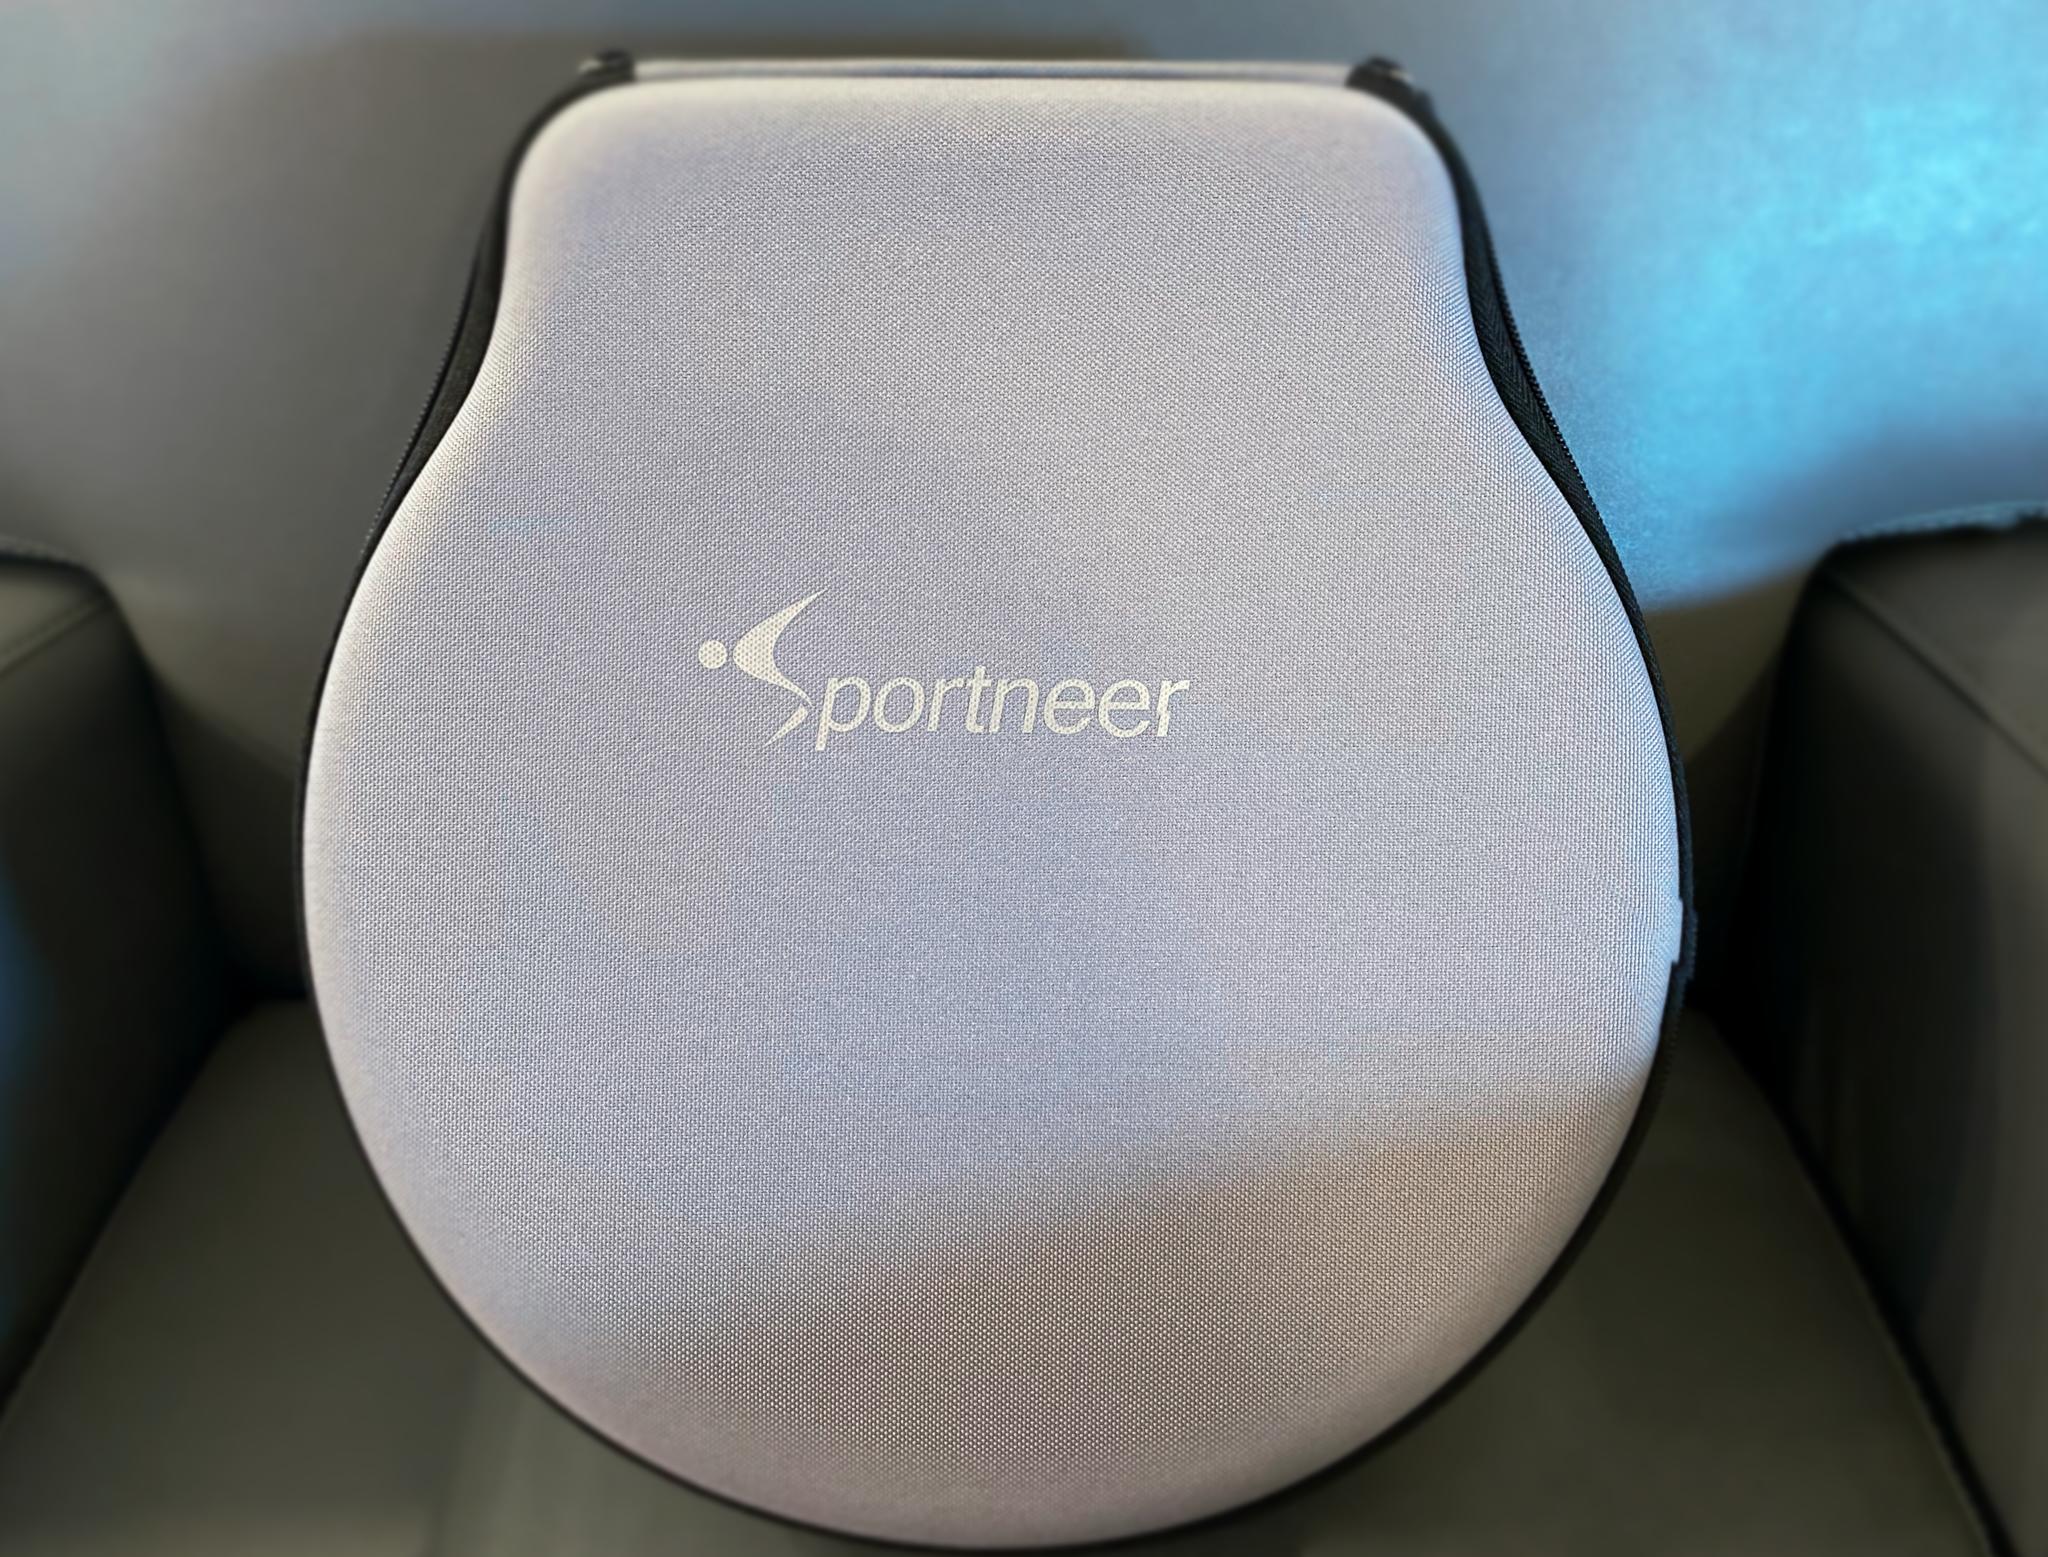 Sportneer Percussion Massager Review Case